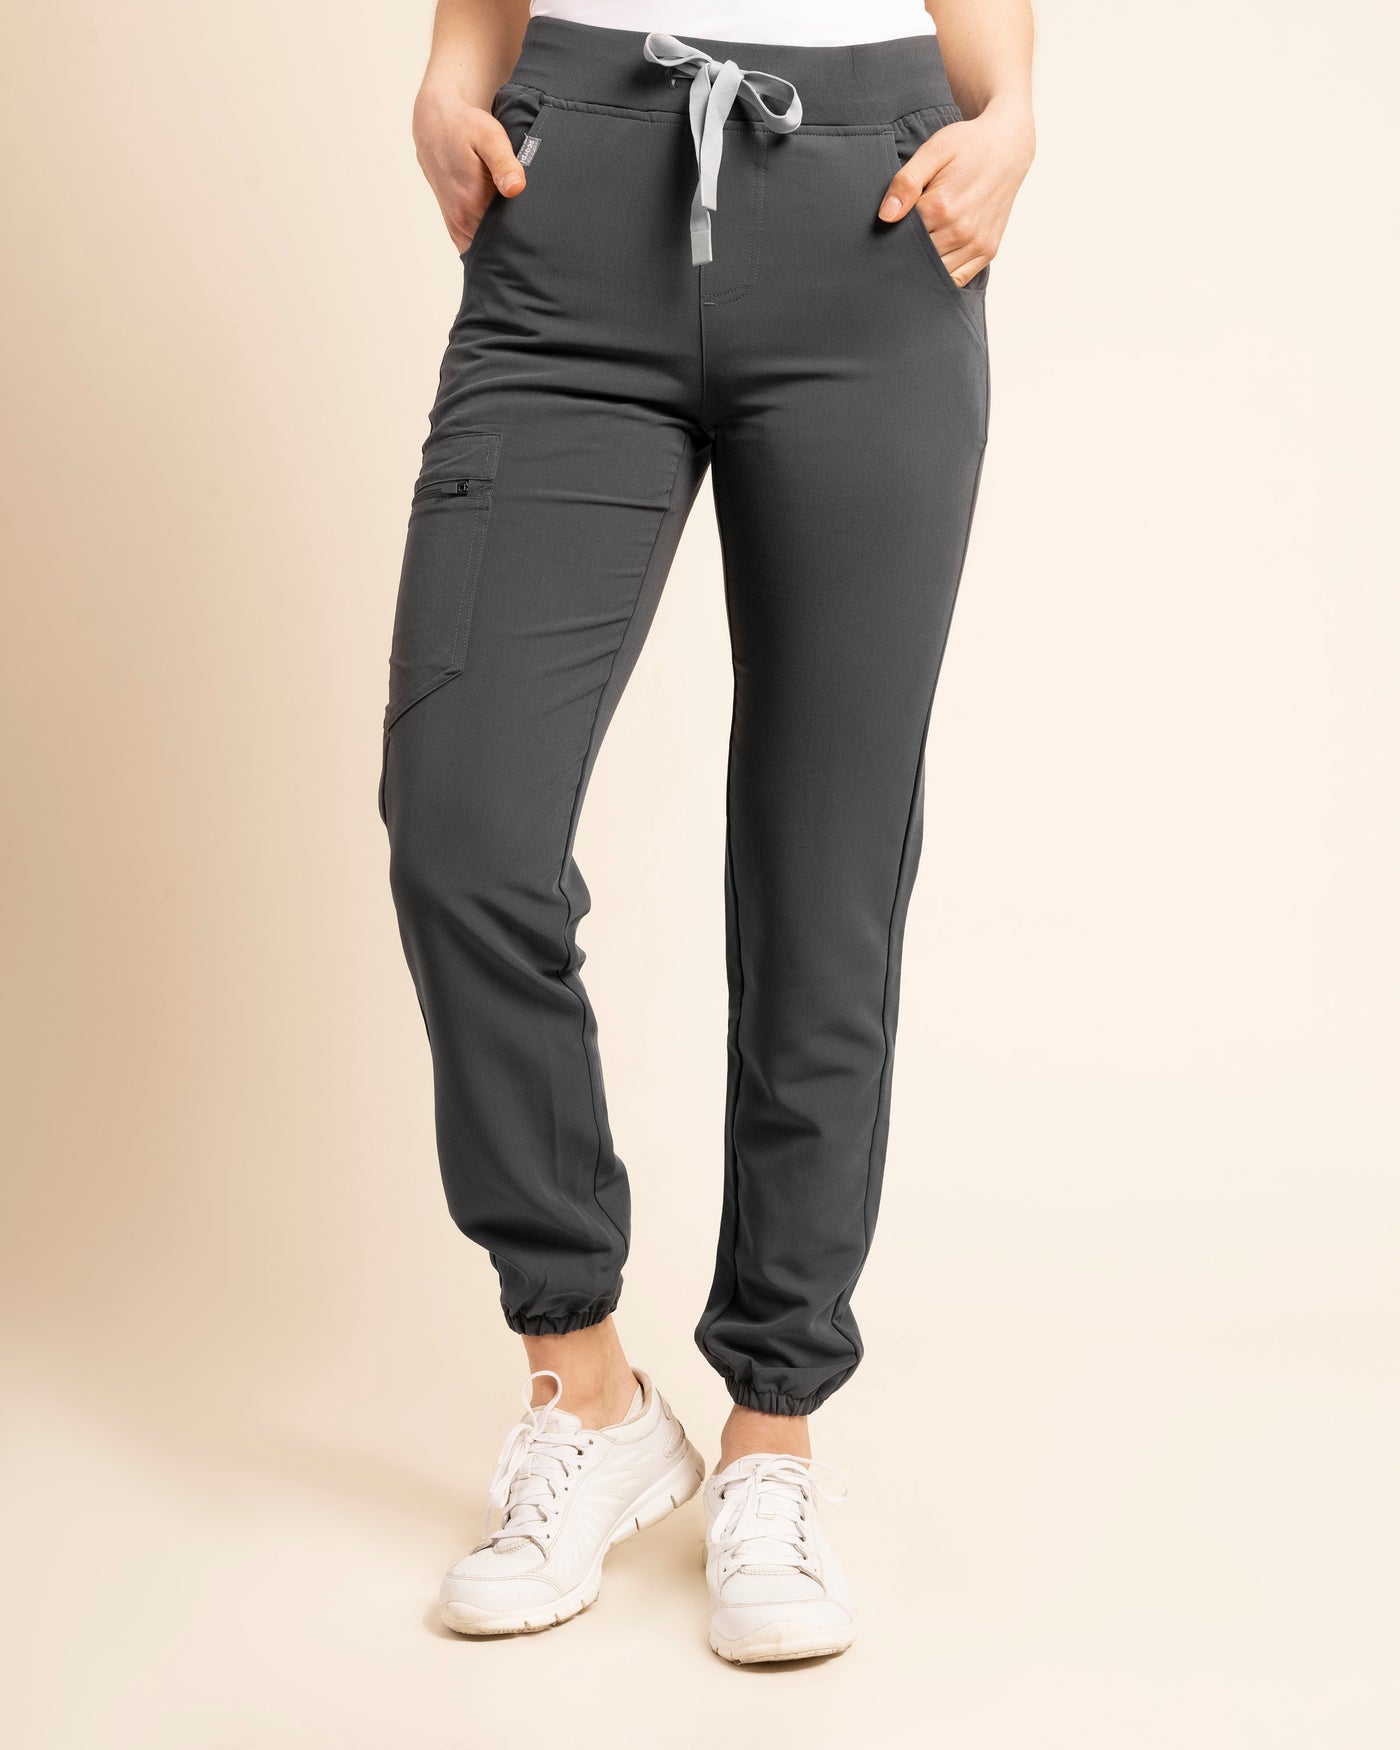 JOGGER MUJER ACTIVE GRIS – Scorpi